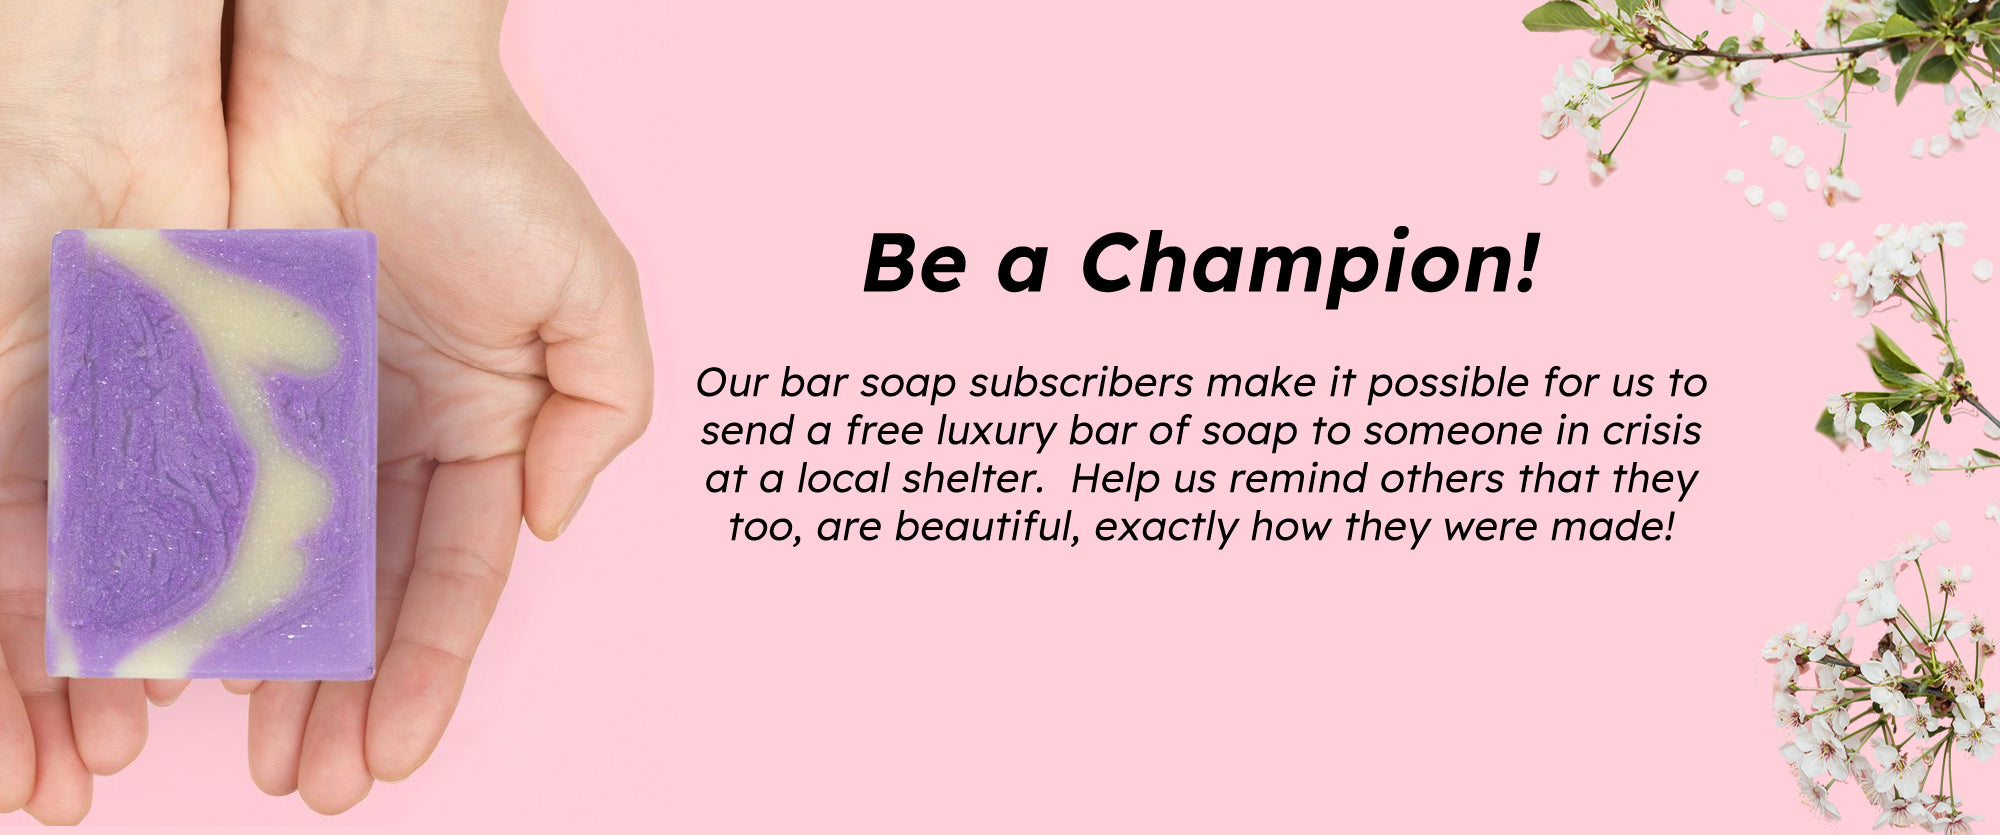 Subscribe to SBU Skincare's Luxury Soap to help women in crisis.